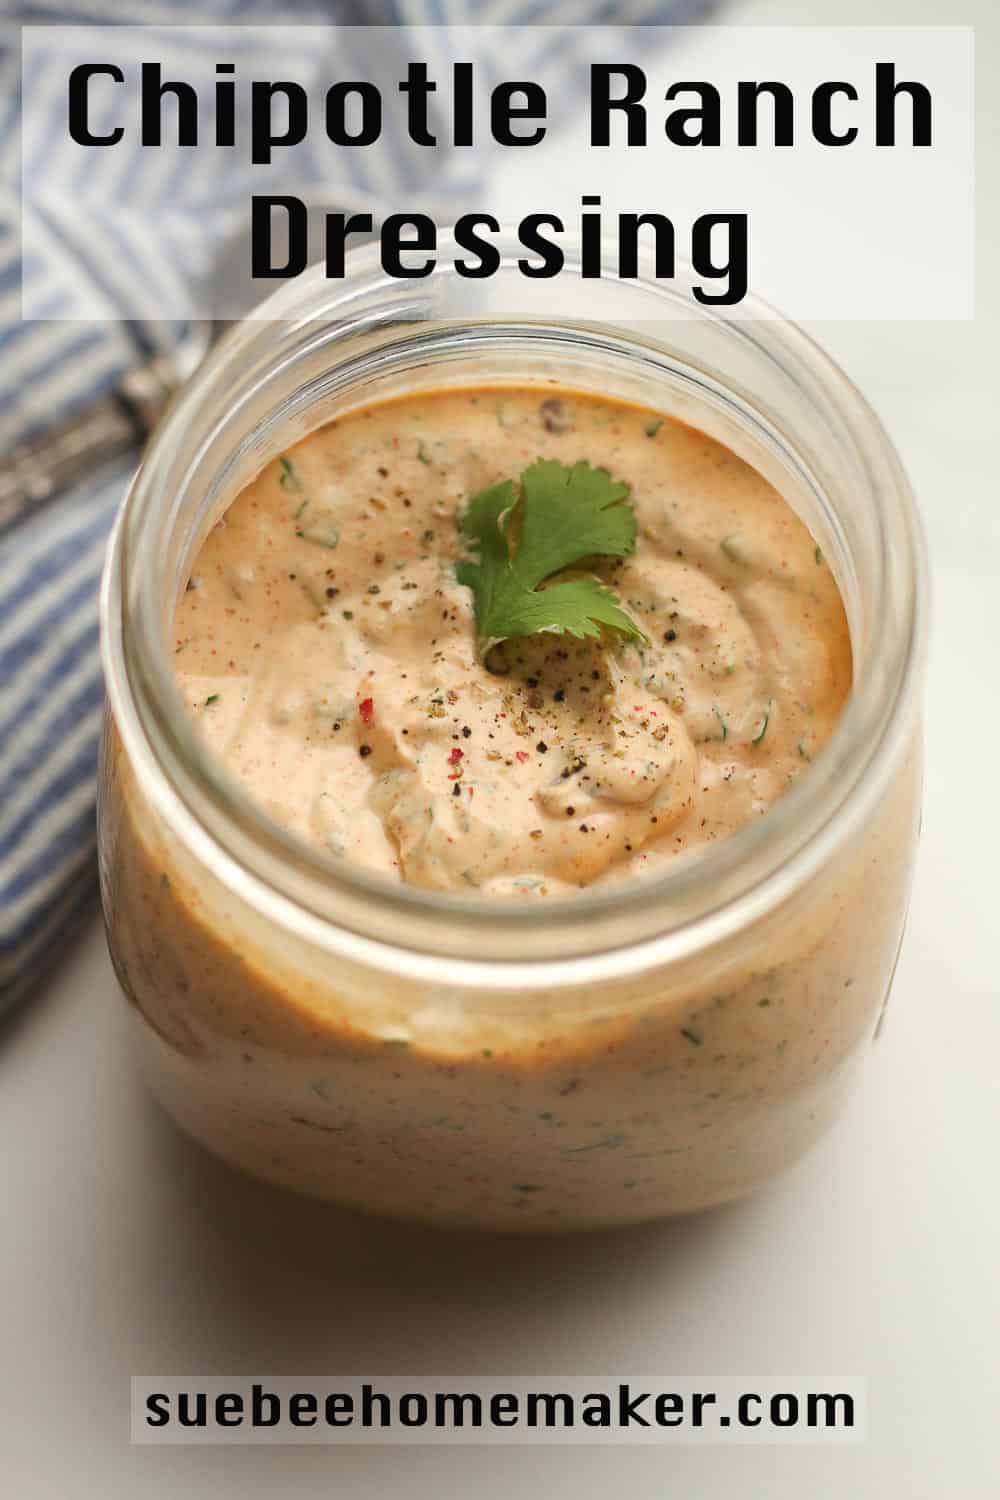 A jar of chipotle ranch dressing.